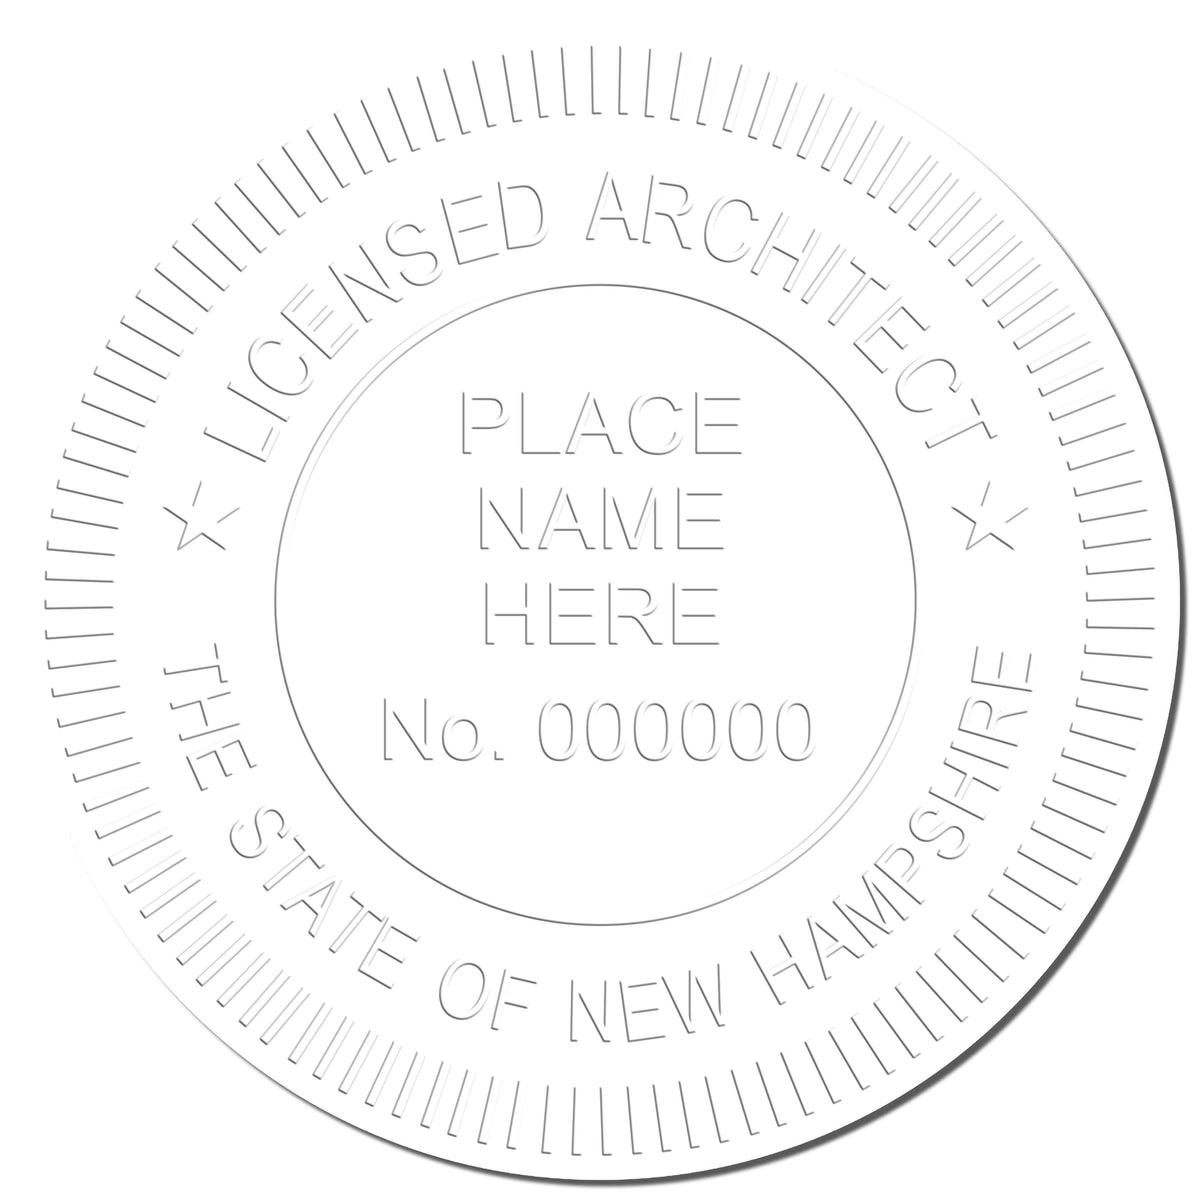 This paper is stamped with a sample imprint of the Hybrid New Hampshire Architect Seal, signifying its quality and reliability.